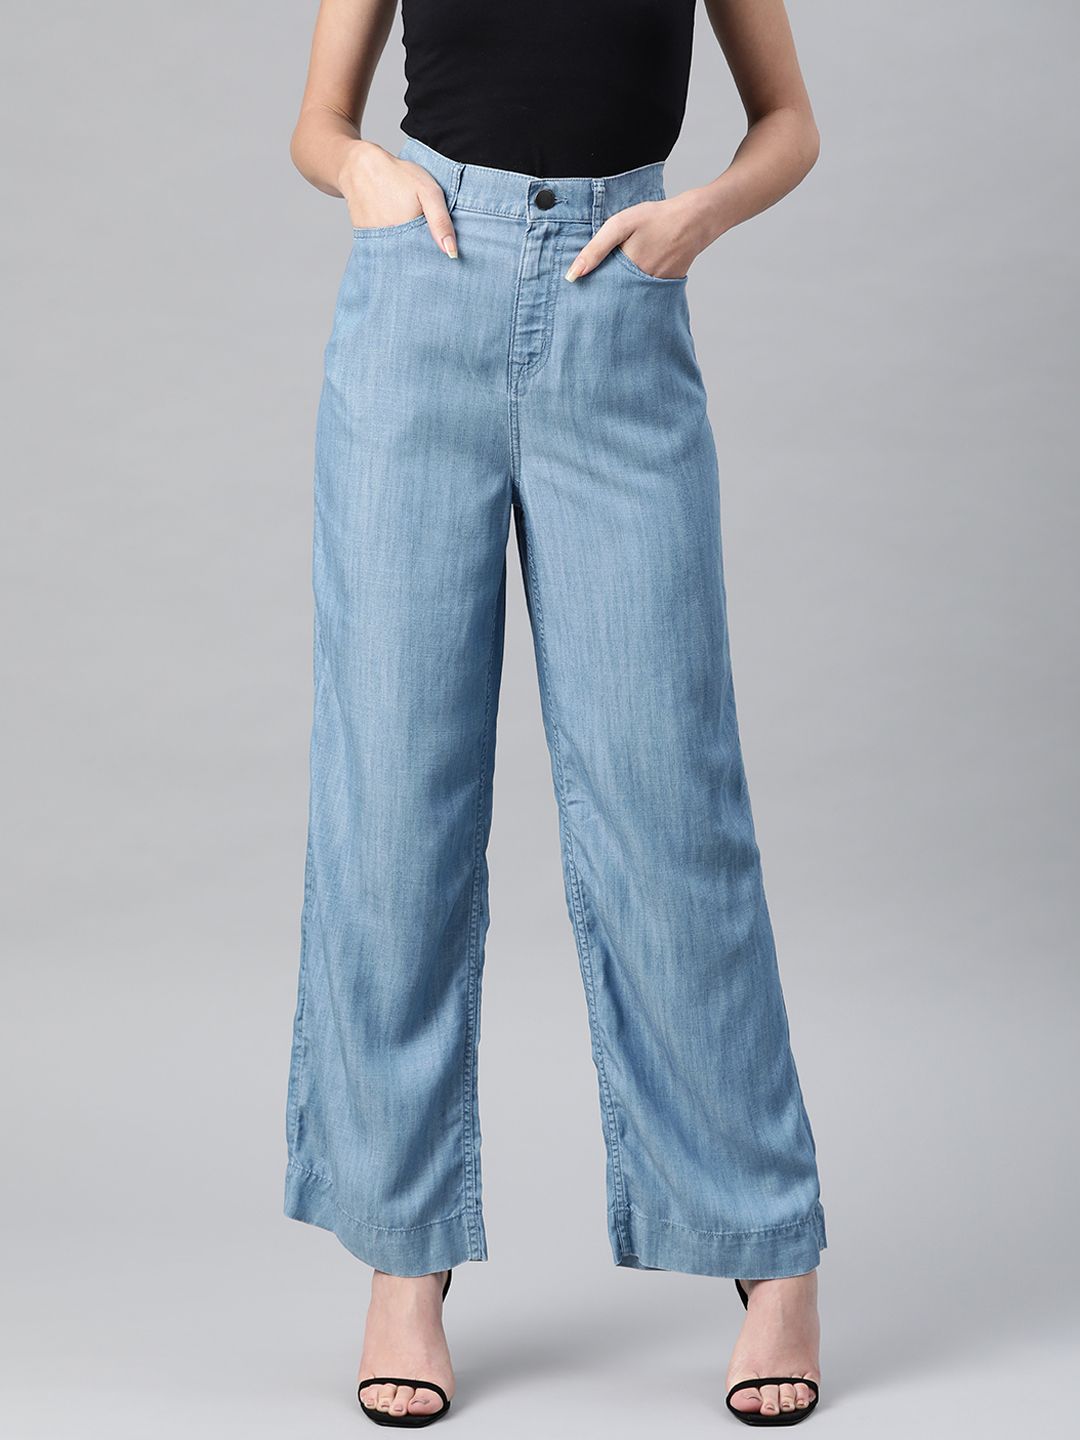 Marks & Spencer Women Blue Wide Leg Mildly Distressed Light Fade Jeans Price in India